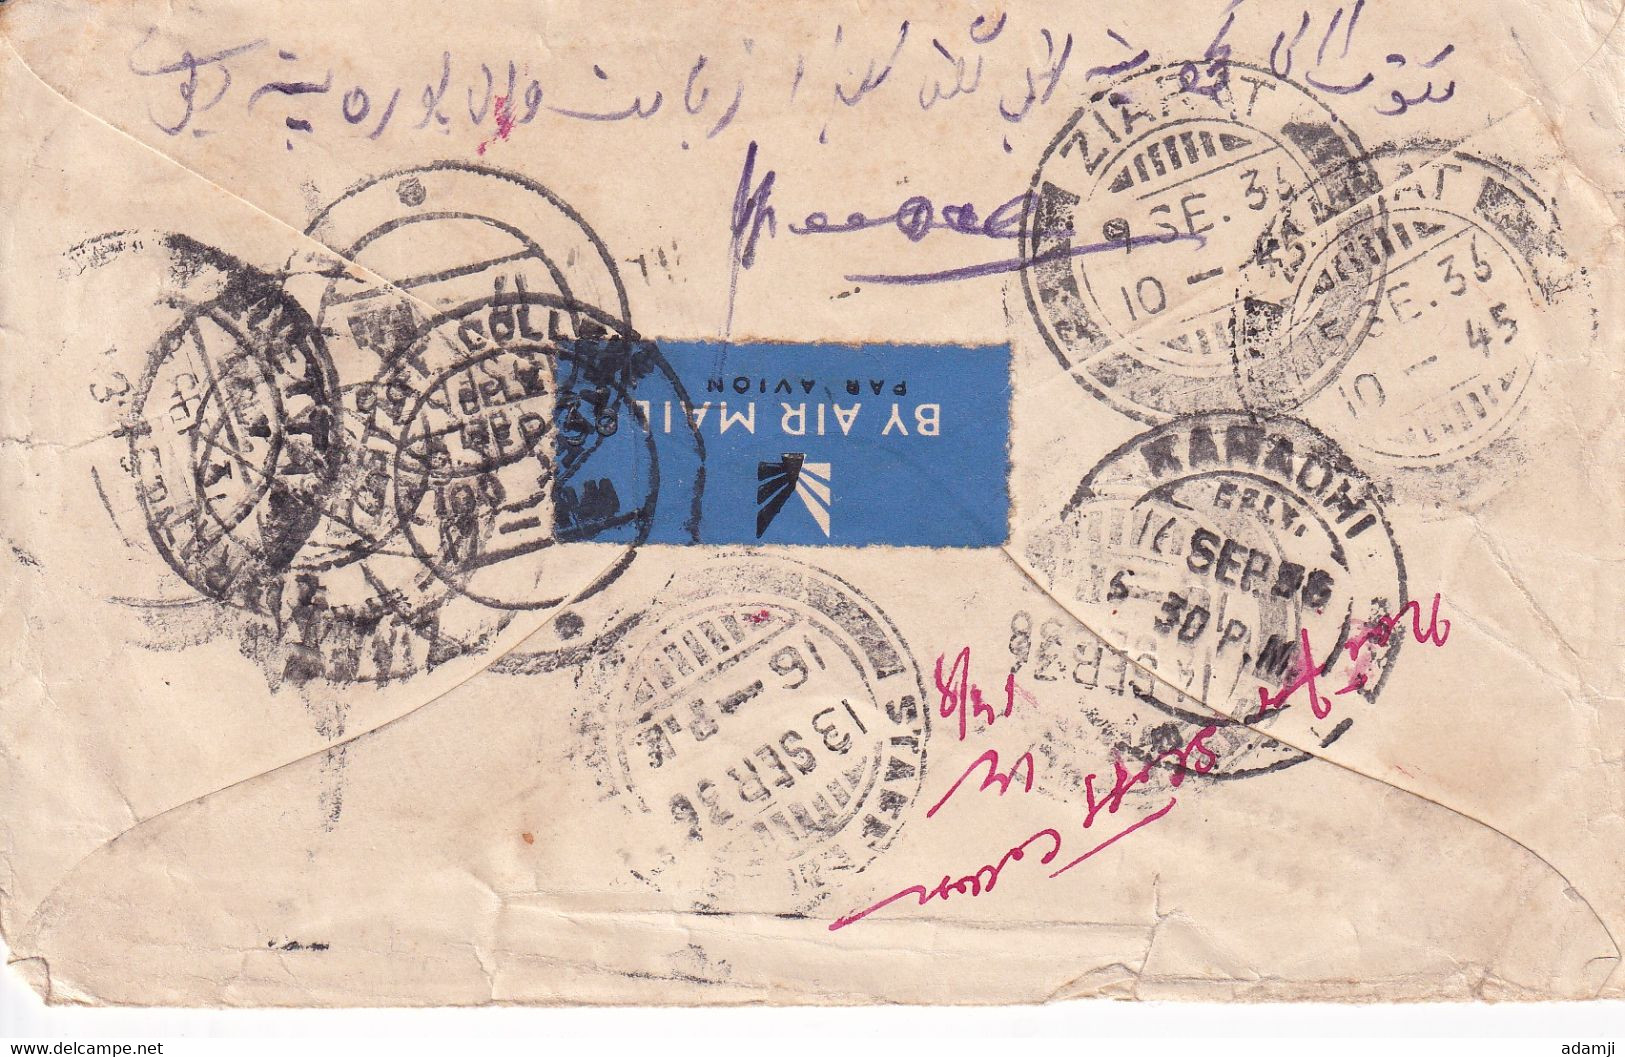 GREAT BRITAIN 1936 EDWARD VIII COVER TO INDIA (BALUCHISTAN Now PAKISTAN) VIA MULTPLE CITIES POSTMARK RARE. - Covers & Documents